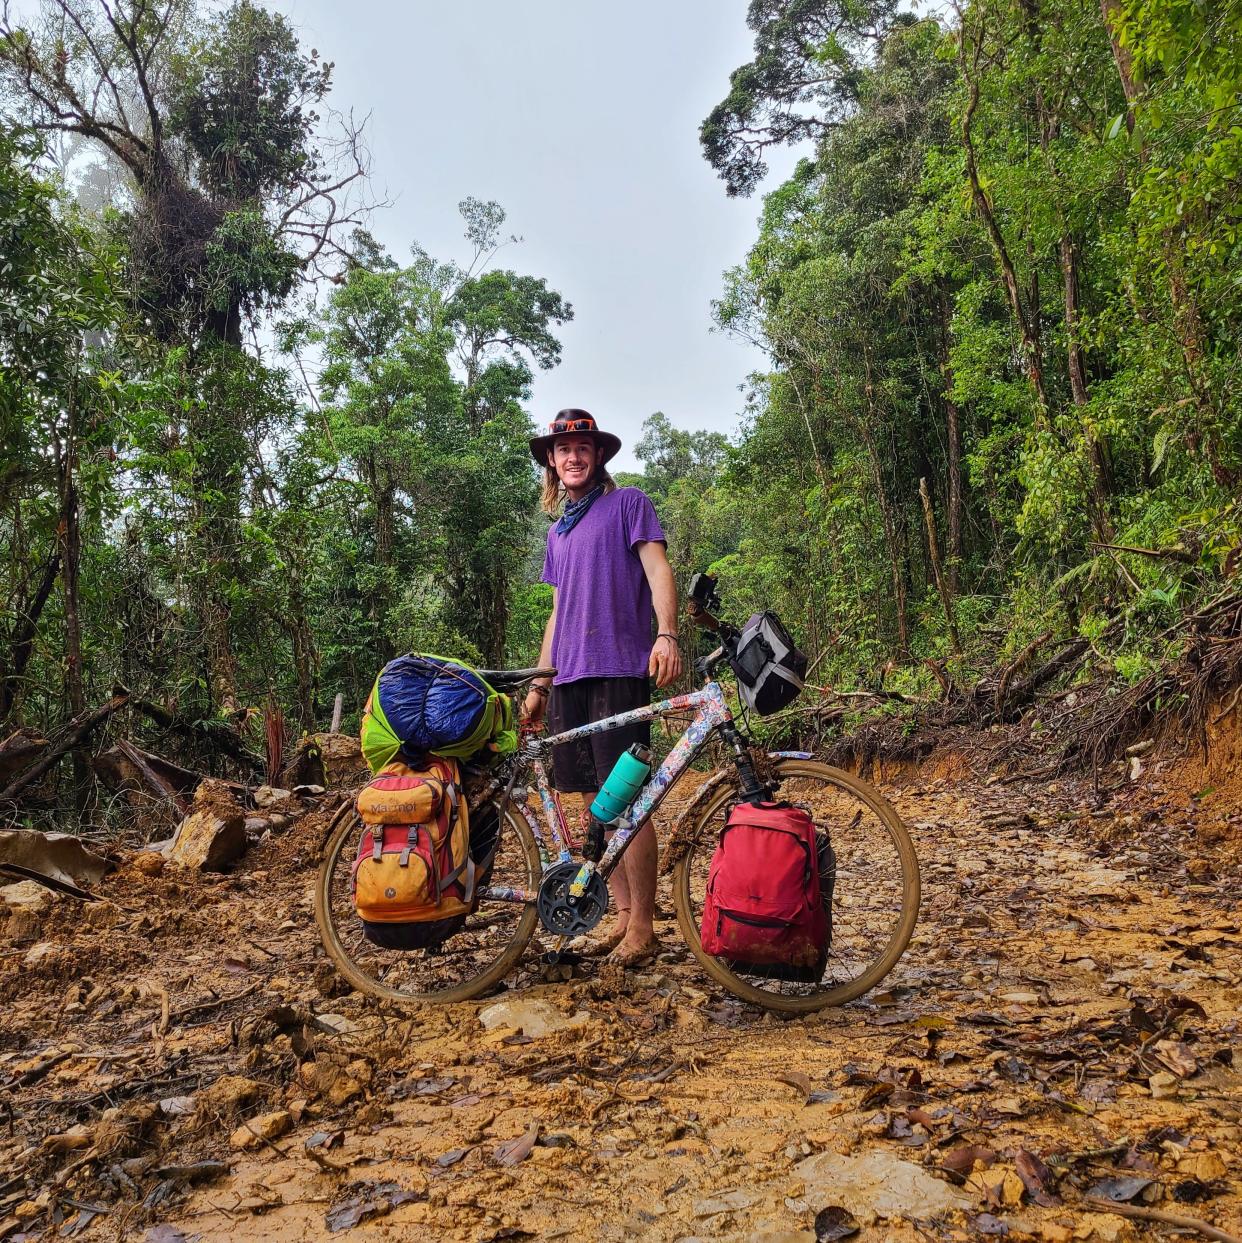 Daniel James of Canton on one of the undeveloped roads he encountered in Central America during his recent solo cycling trip, an adventure he undertook barefoot.